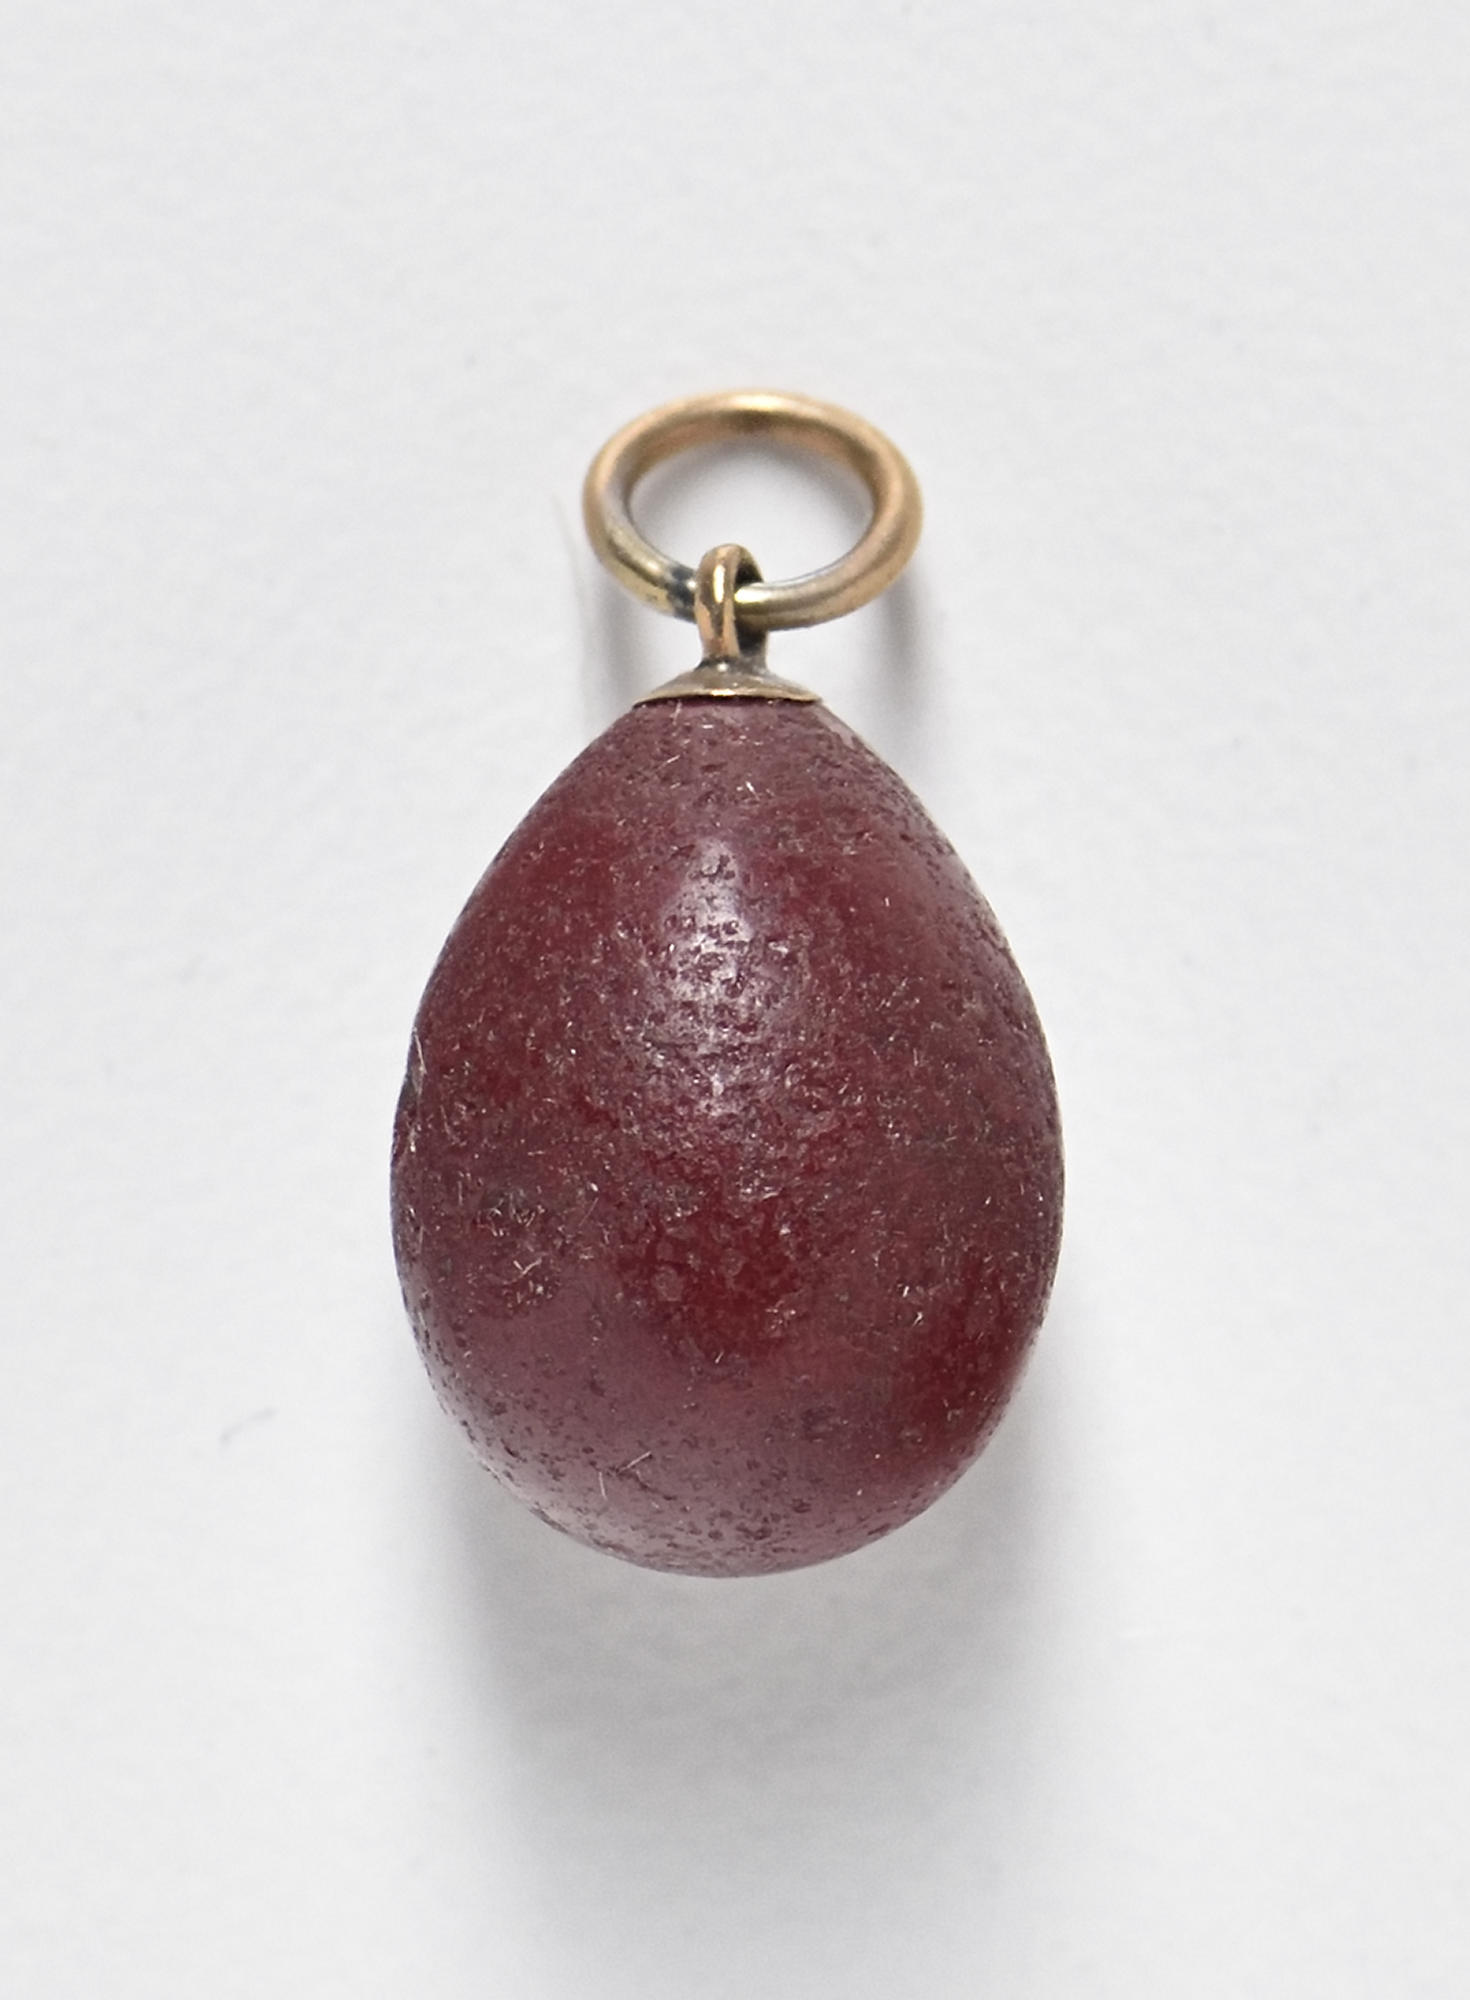 A red egg shaped pendant